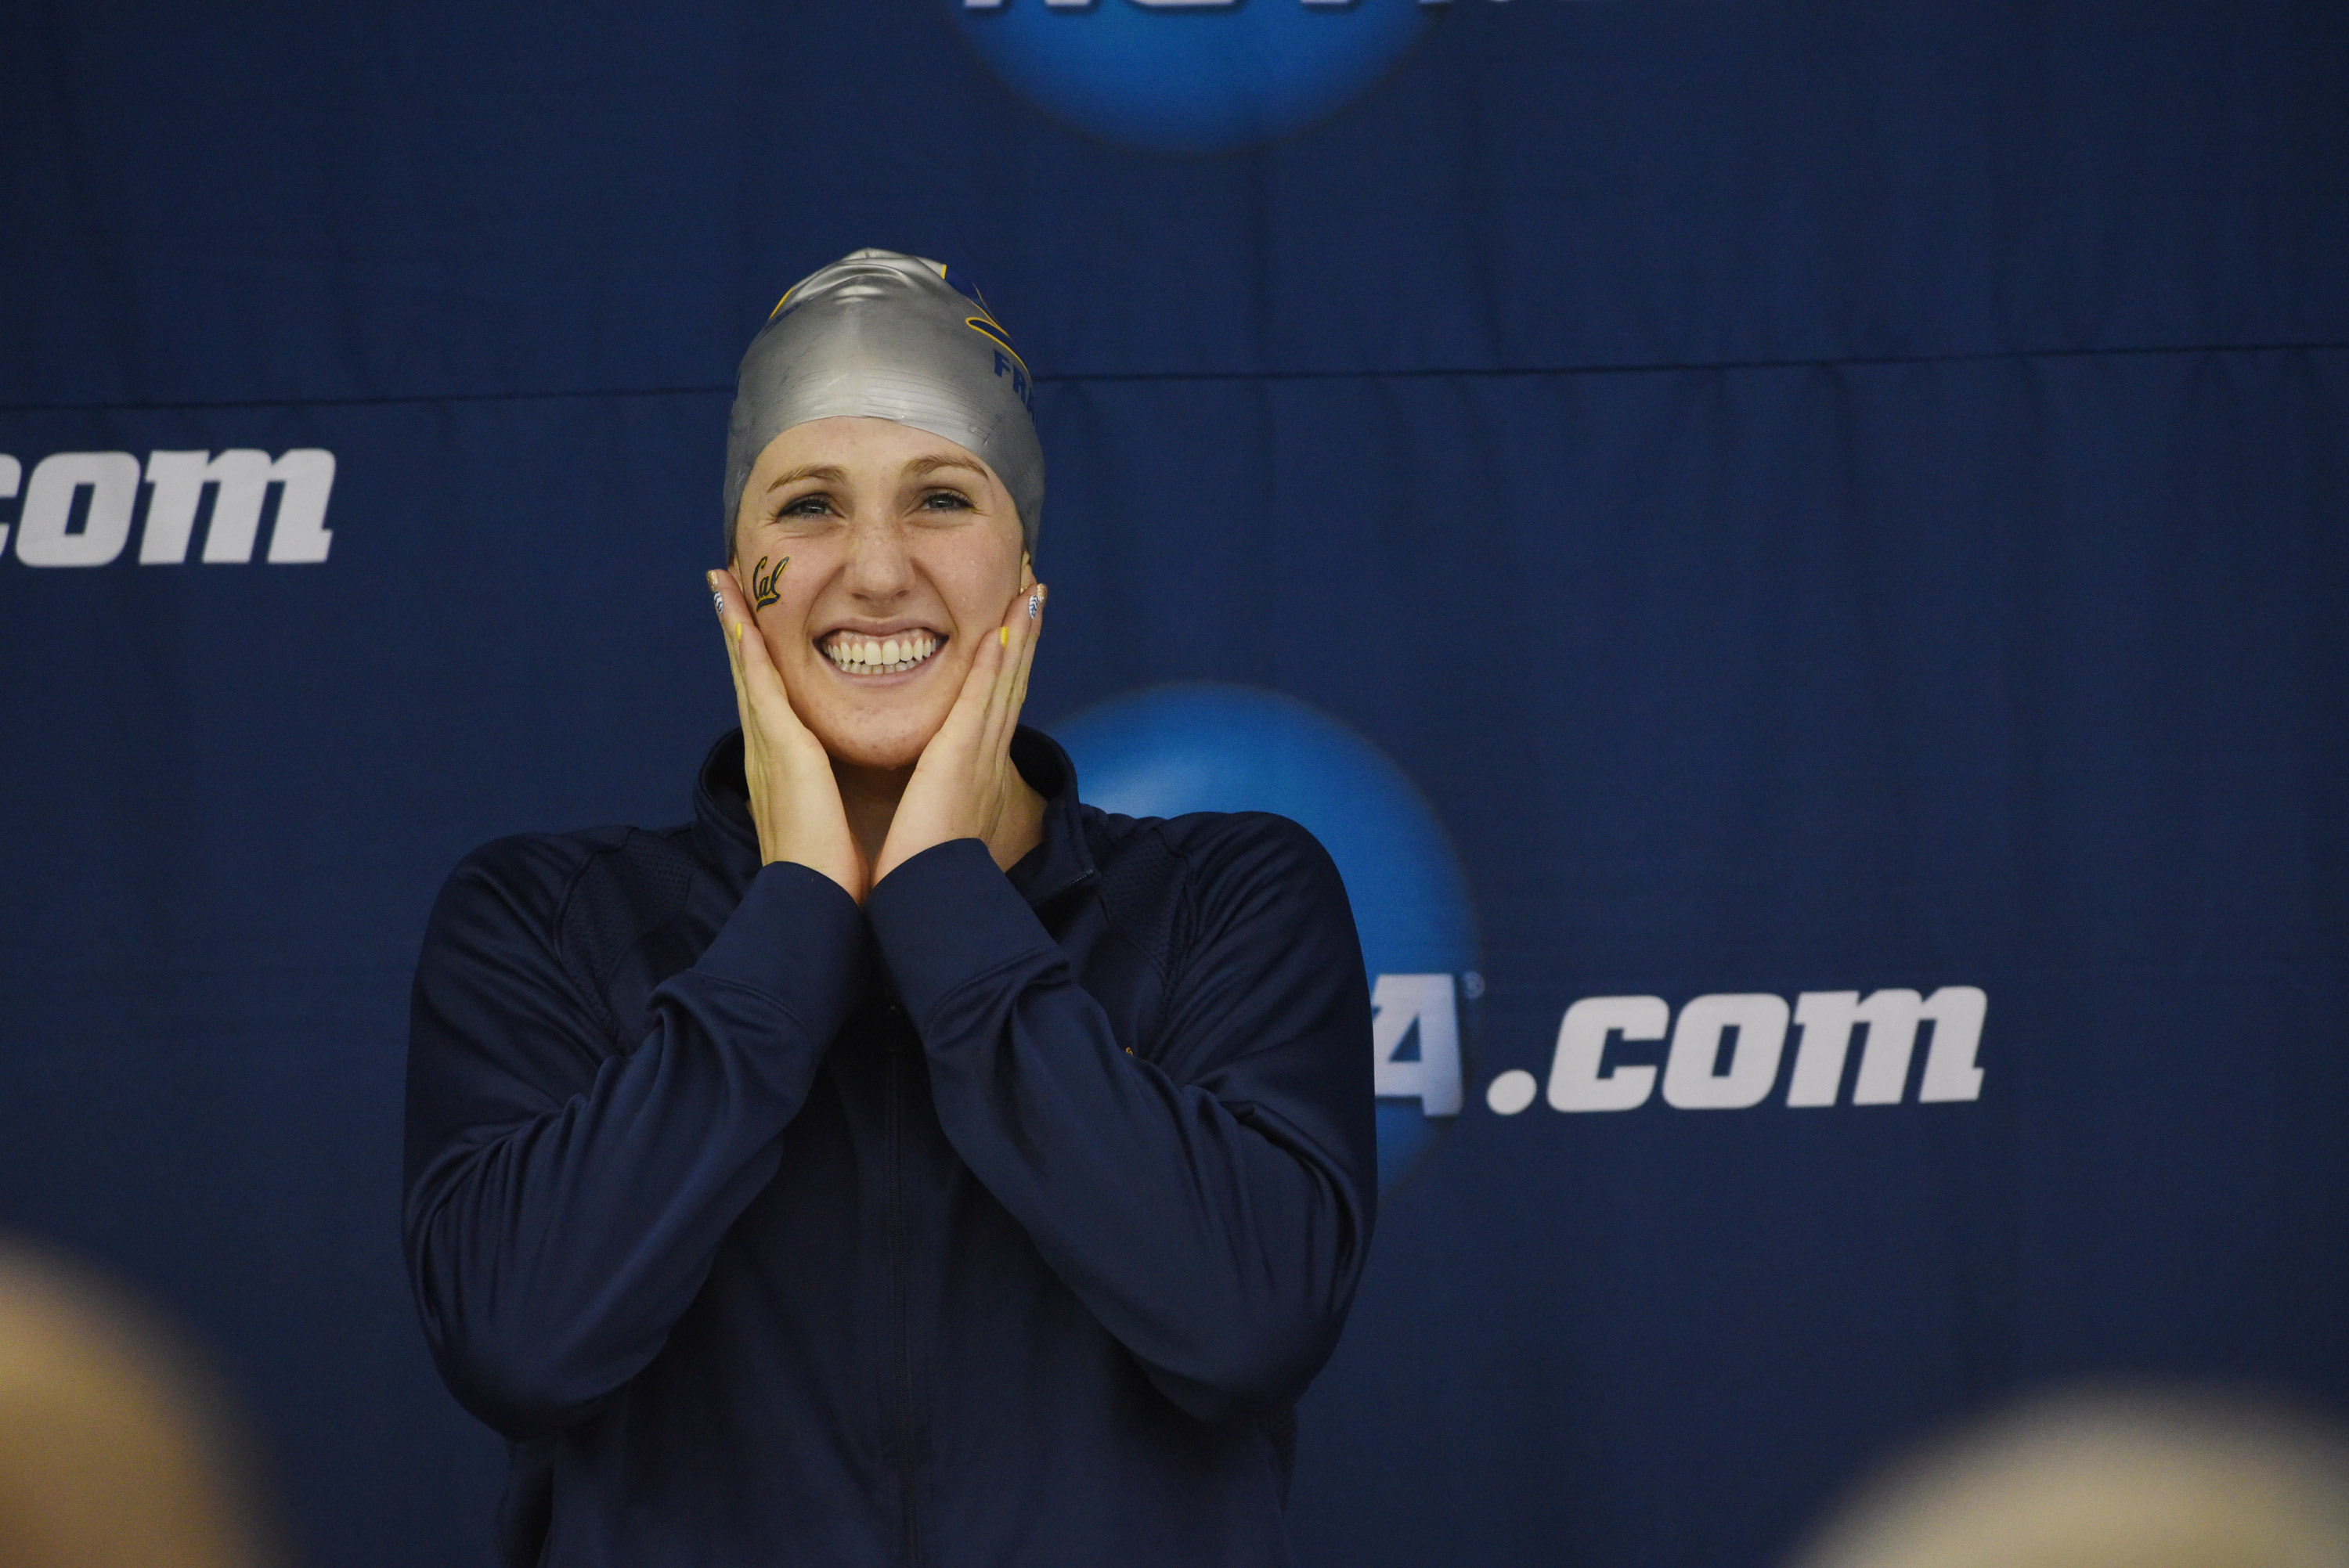 Missy Franklin after winning the 200 backstroke finals during NCAA Division I Swimming and Diving-Championships at Greensboro Aquatic Center. Photo via Evan Pike/USA TODAY Sports 